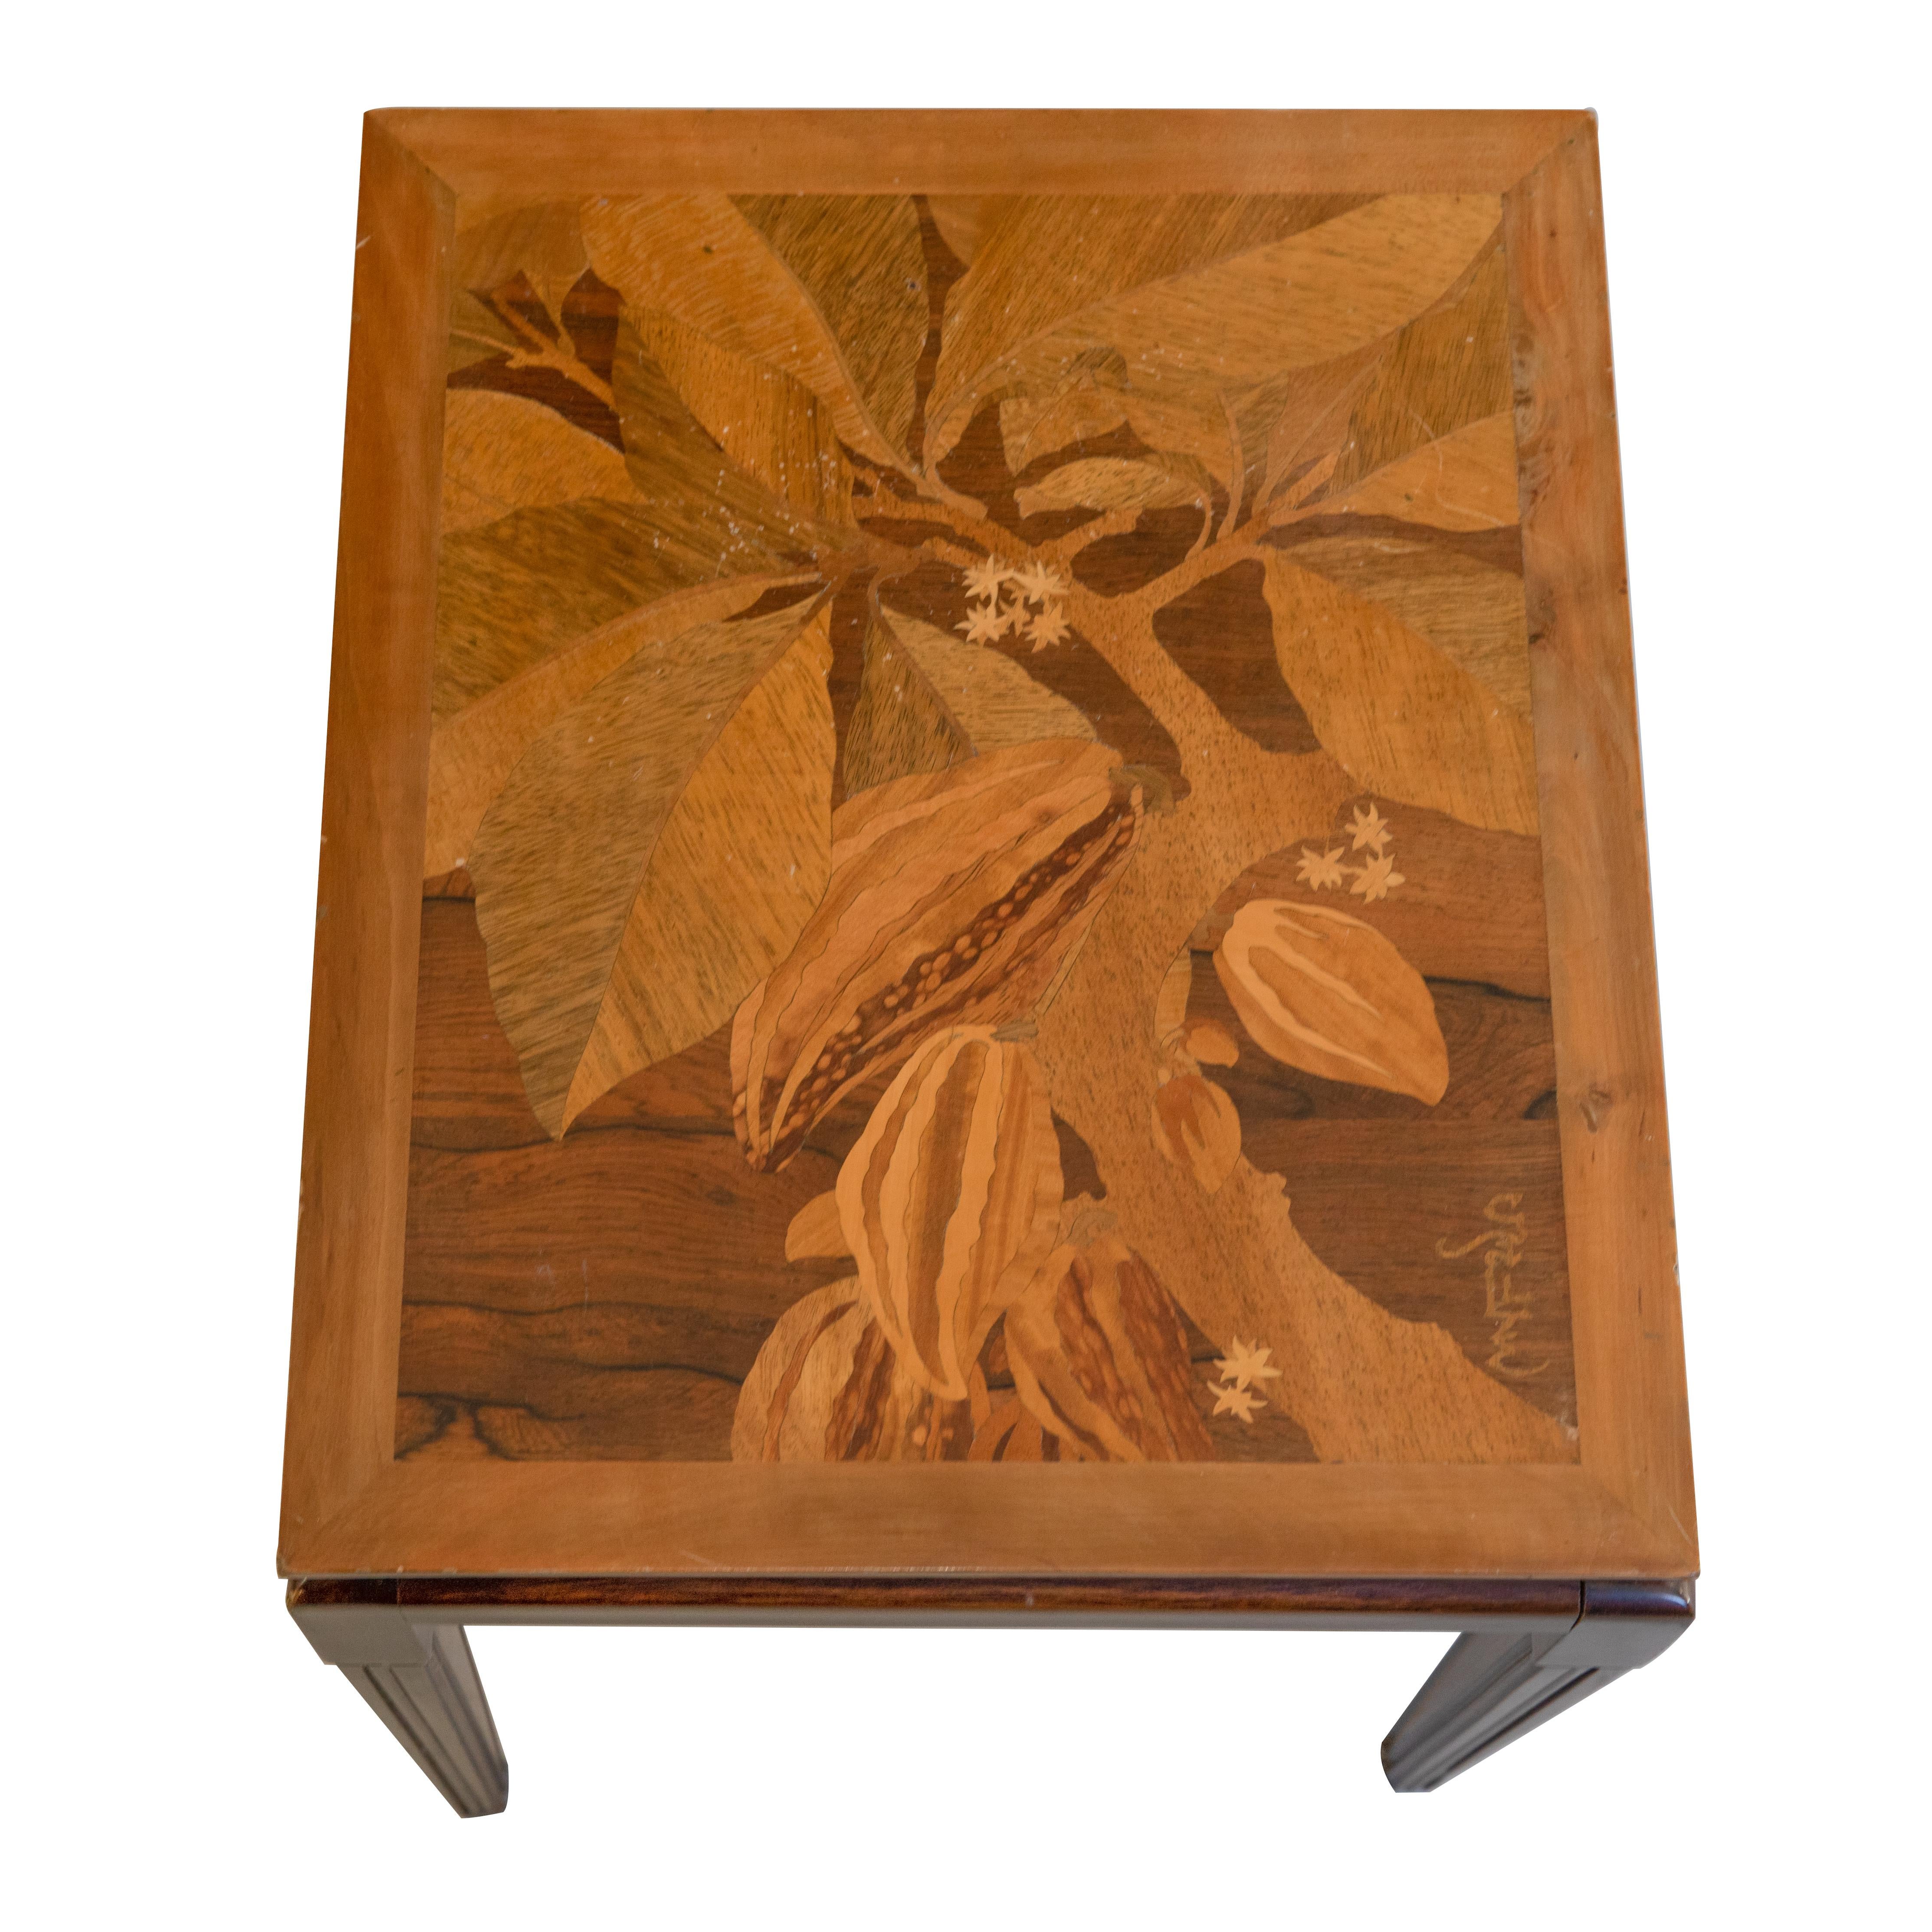 Fruitwood Gallé Inlaid Early 20th Century Art Nouveau Side Table with Floral Motifs